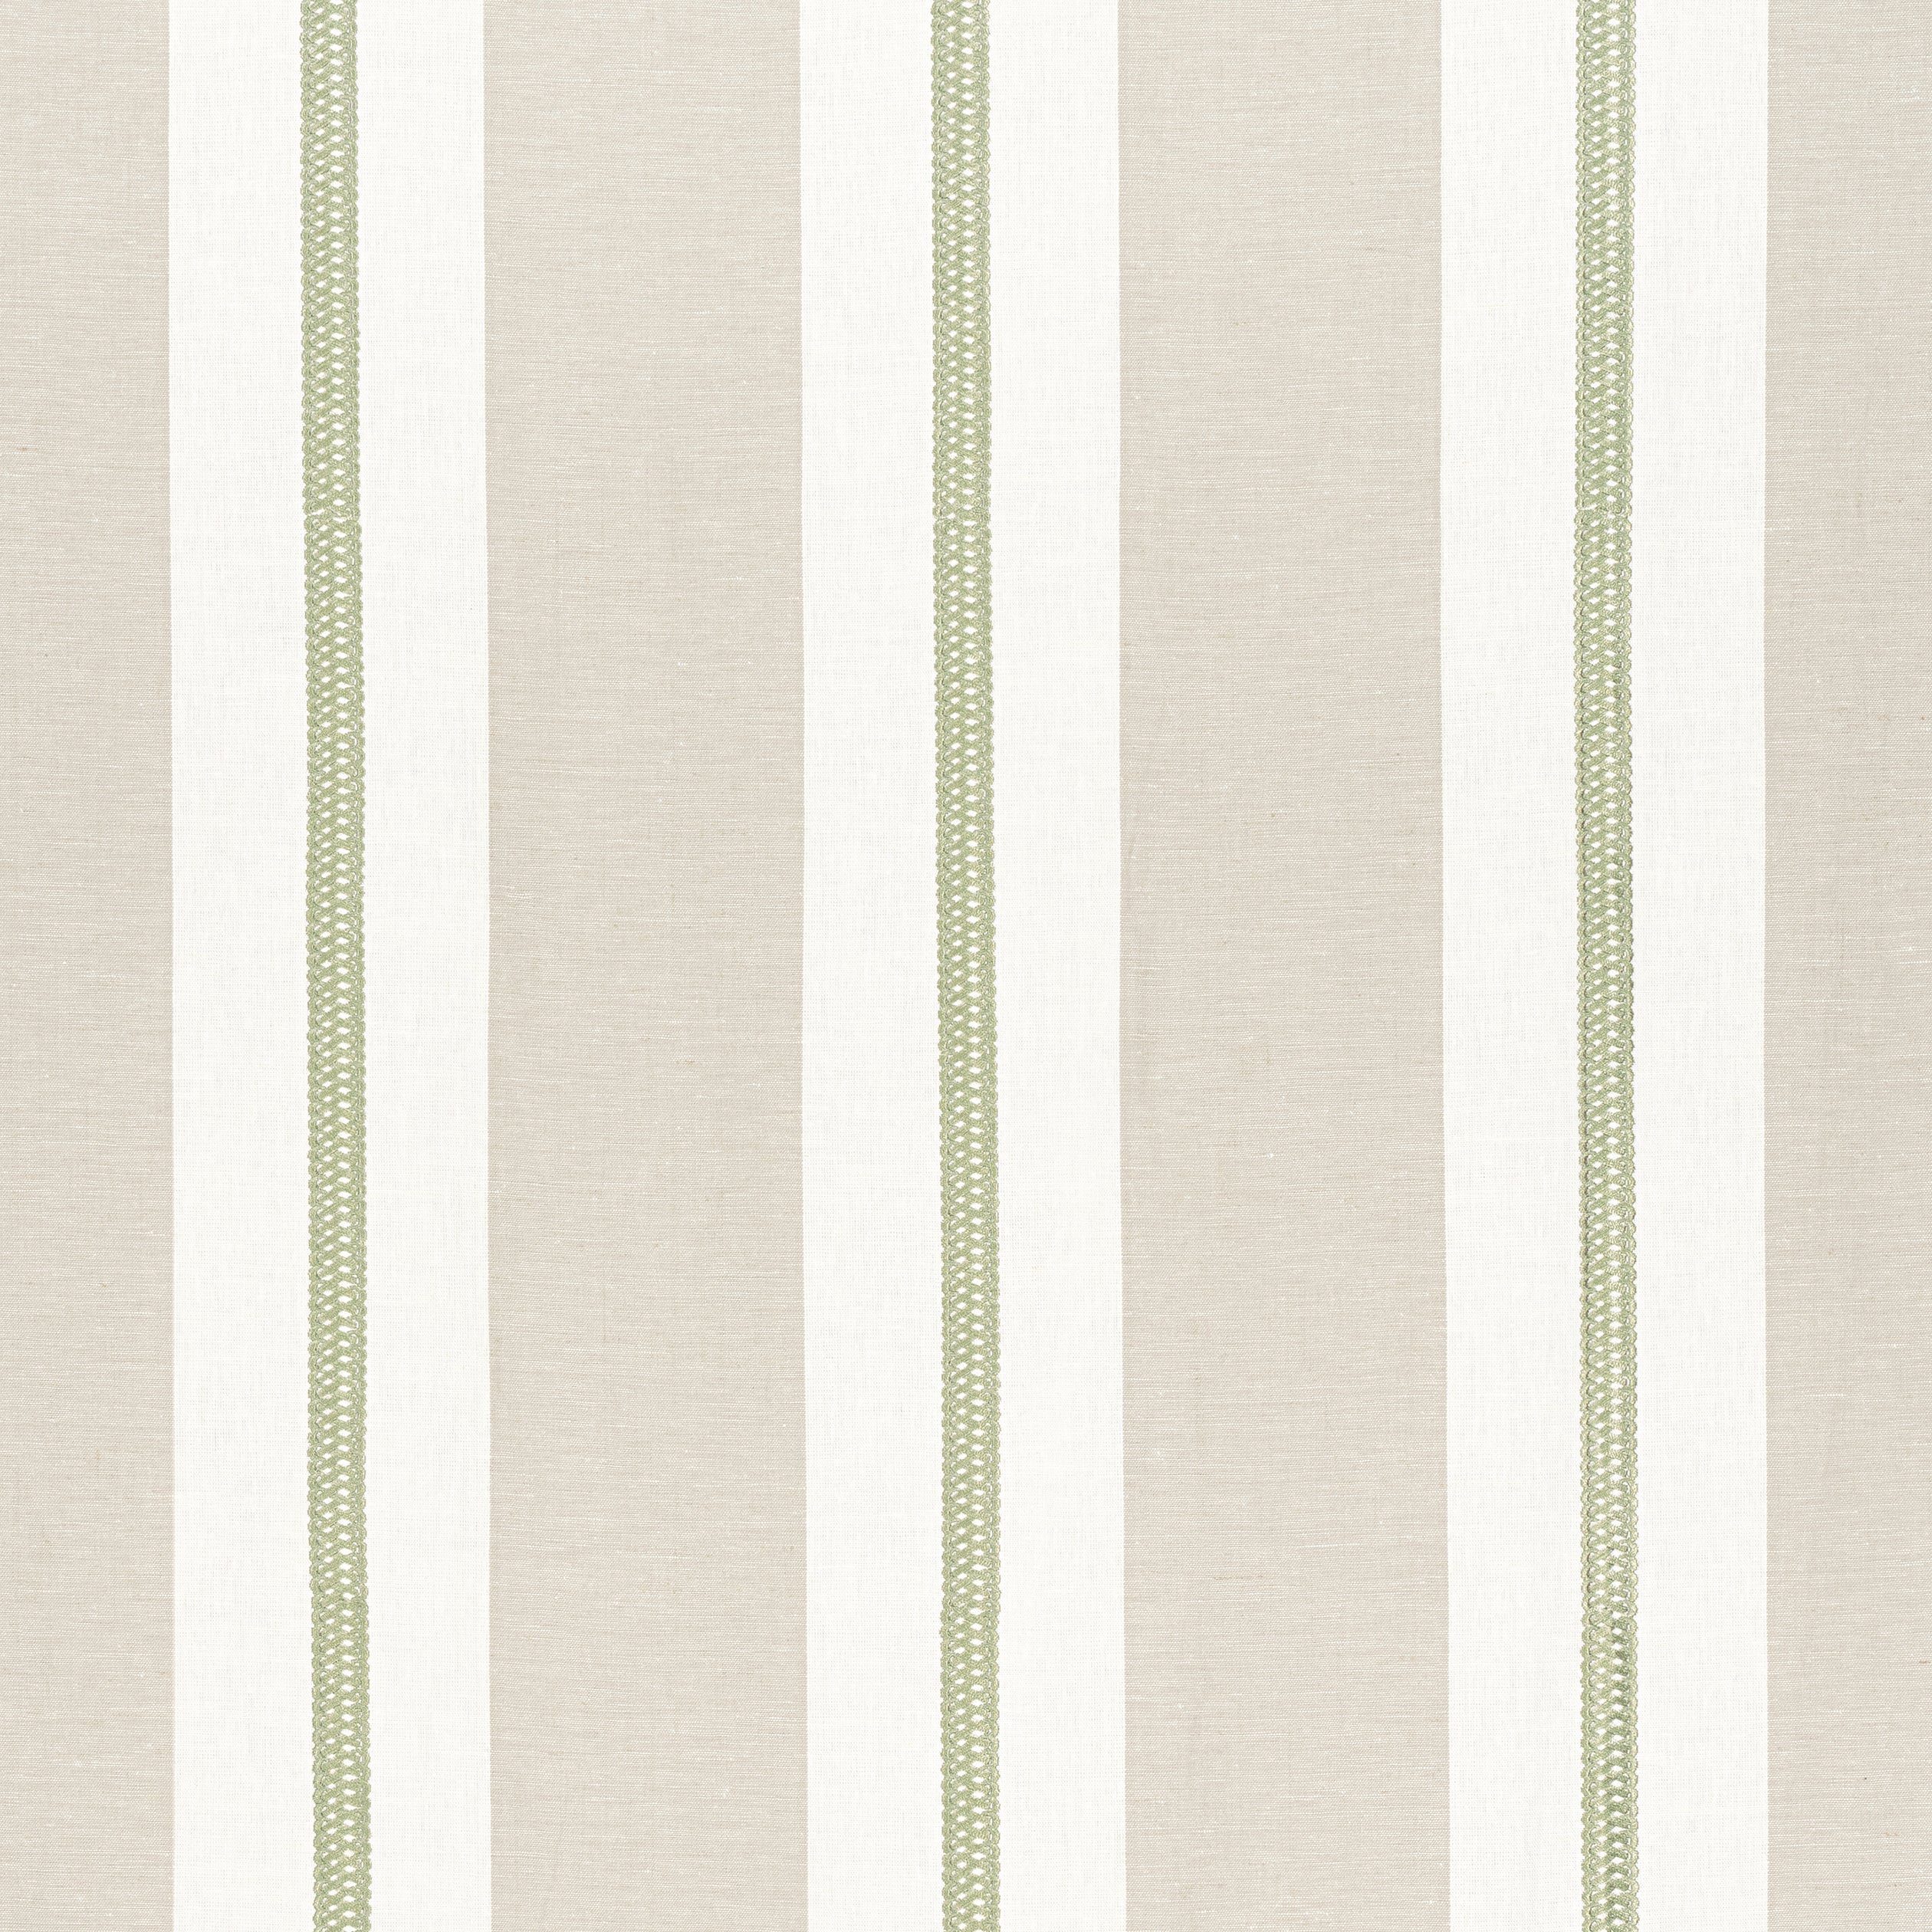 Alden Stripe Embroidery fabric in Sage color - pattern number AW24532 - by Anna French in the Devon collection